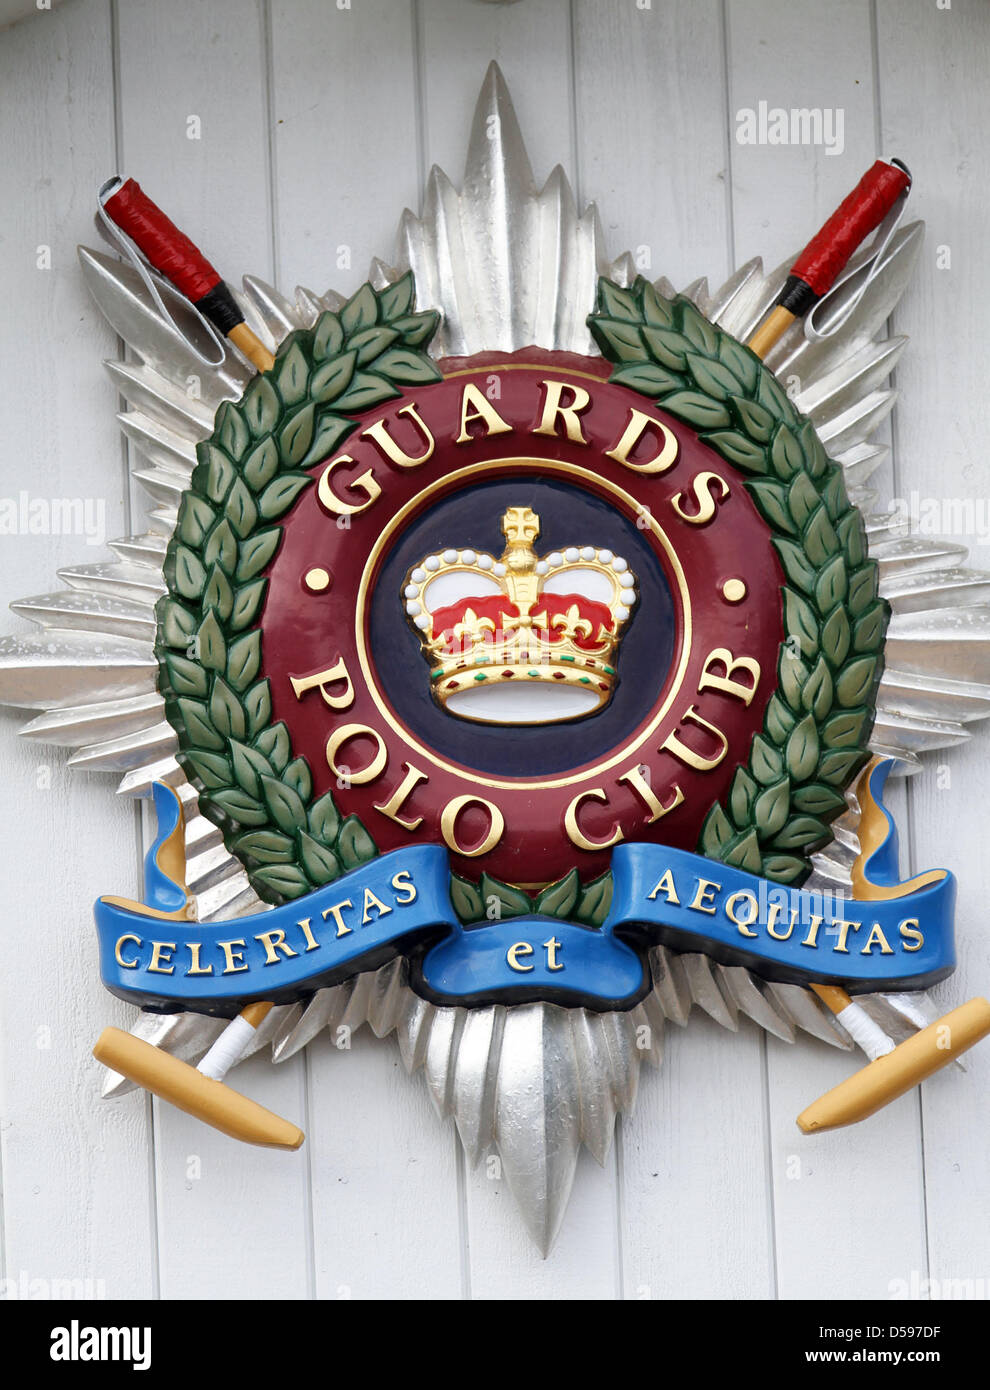 Logo of the Guards Polo Club captured at the Harcourt Developments Queen's Cup at Guards Polo Club in Windsor Great Park, United Kingdom, 13 June 2010. The club was founded on 25 January 1955 by the Duke of Edinburgh. Photo: Albert Nieboer (NETHERLANDS OUT) Stock Photo